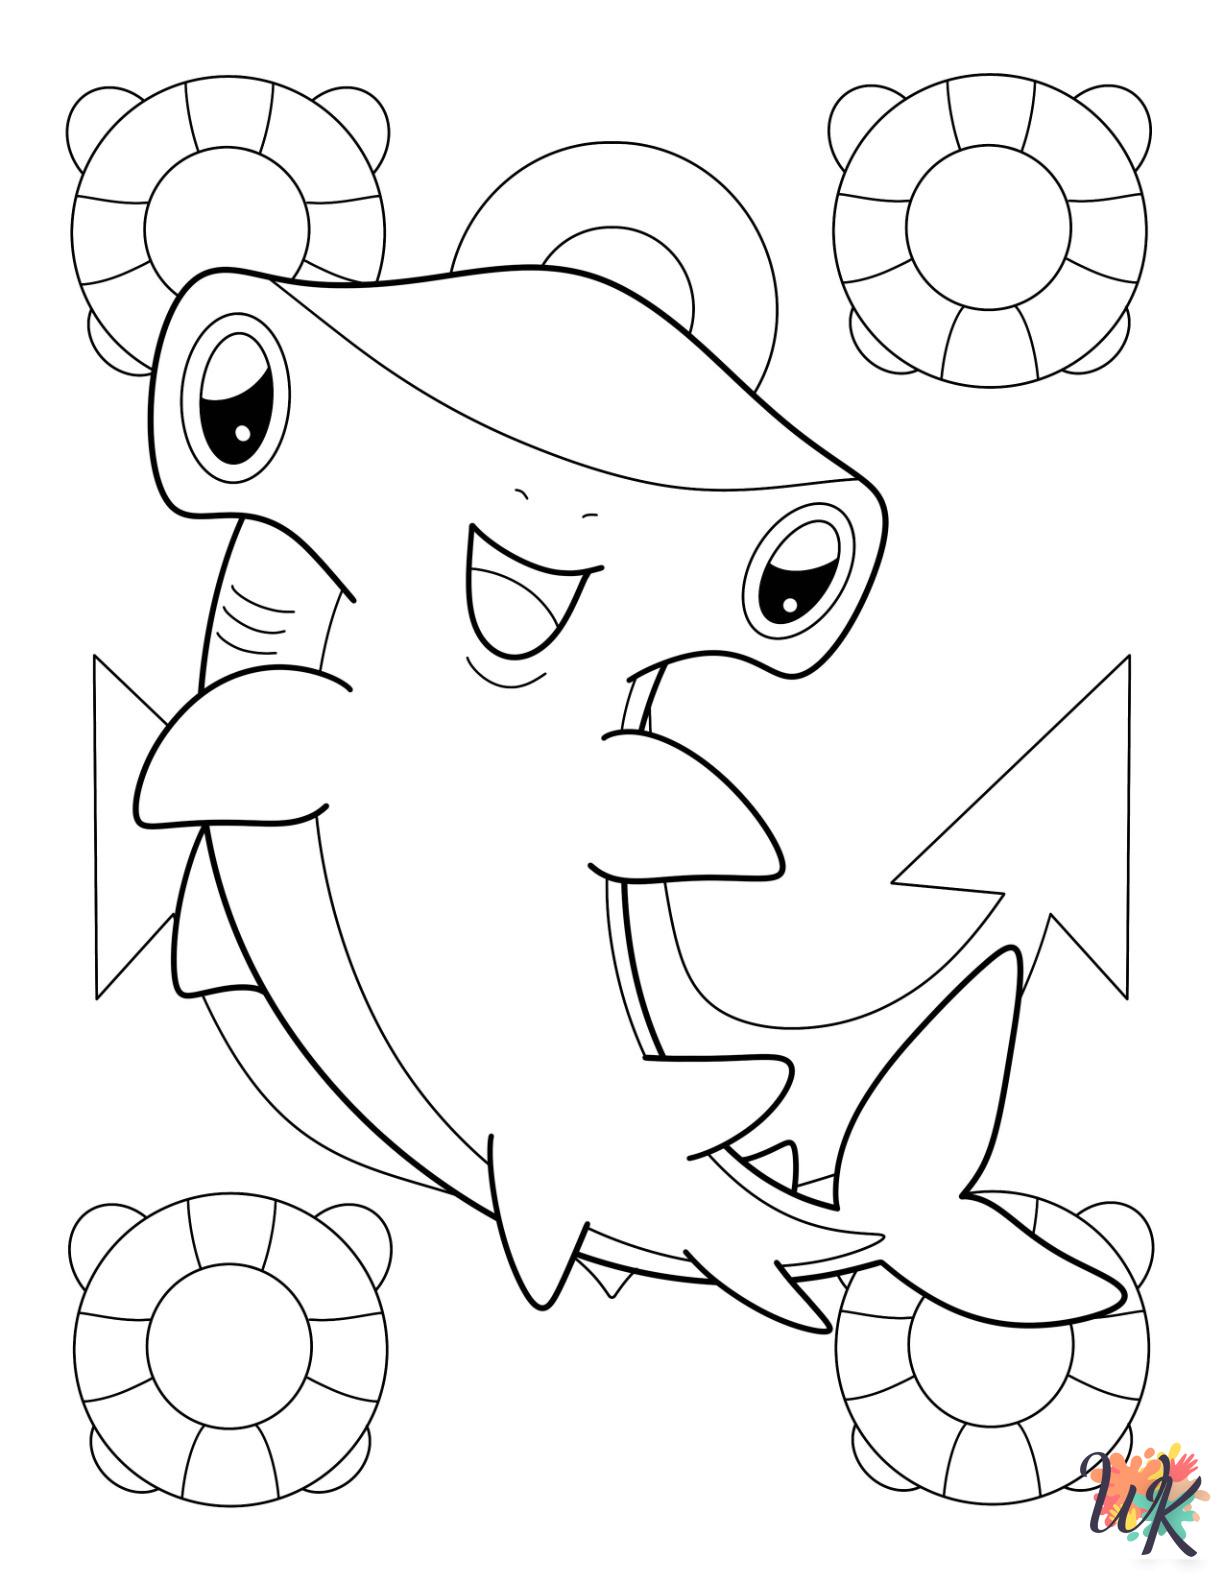 Hammerhead Shark coloring pages for kids